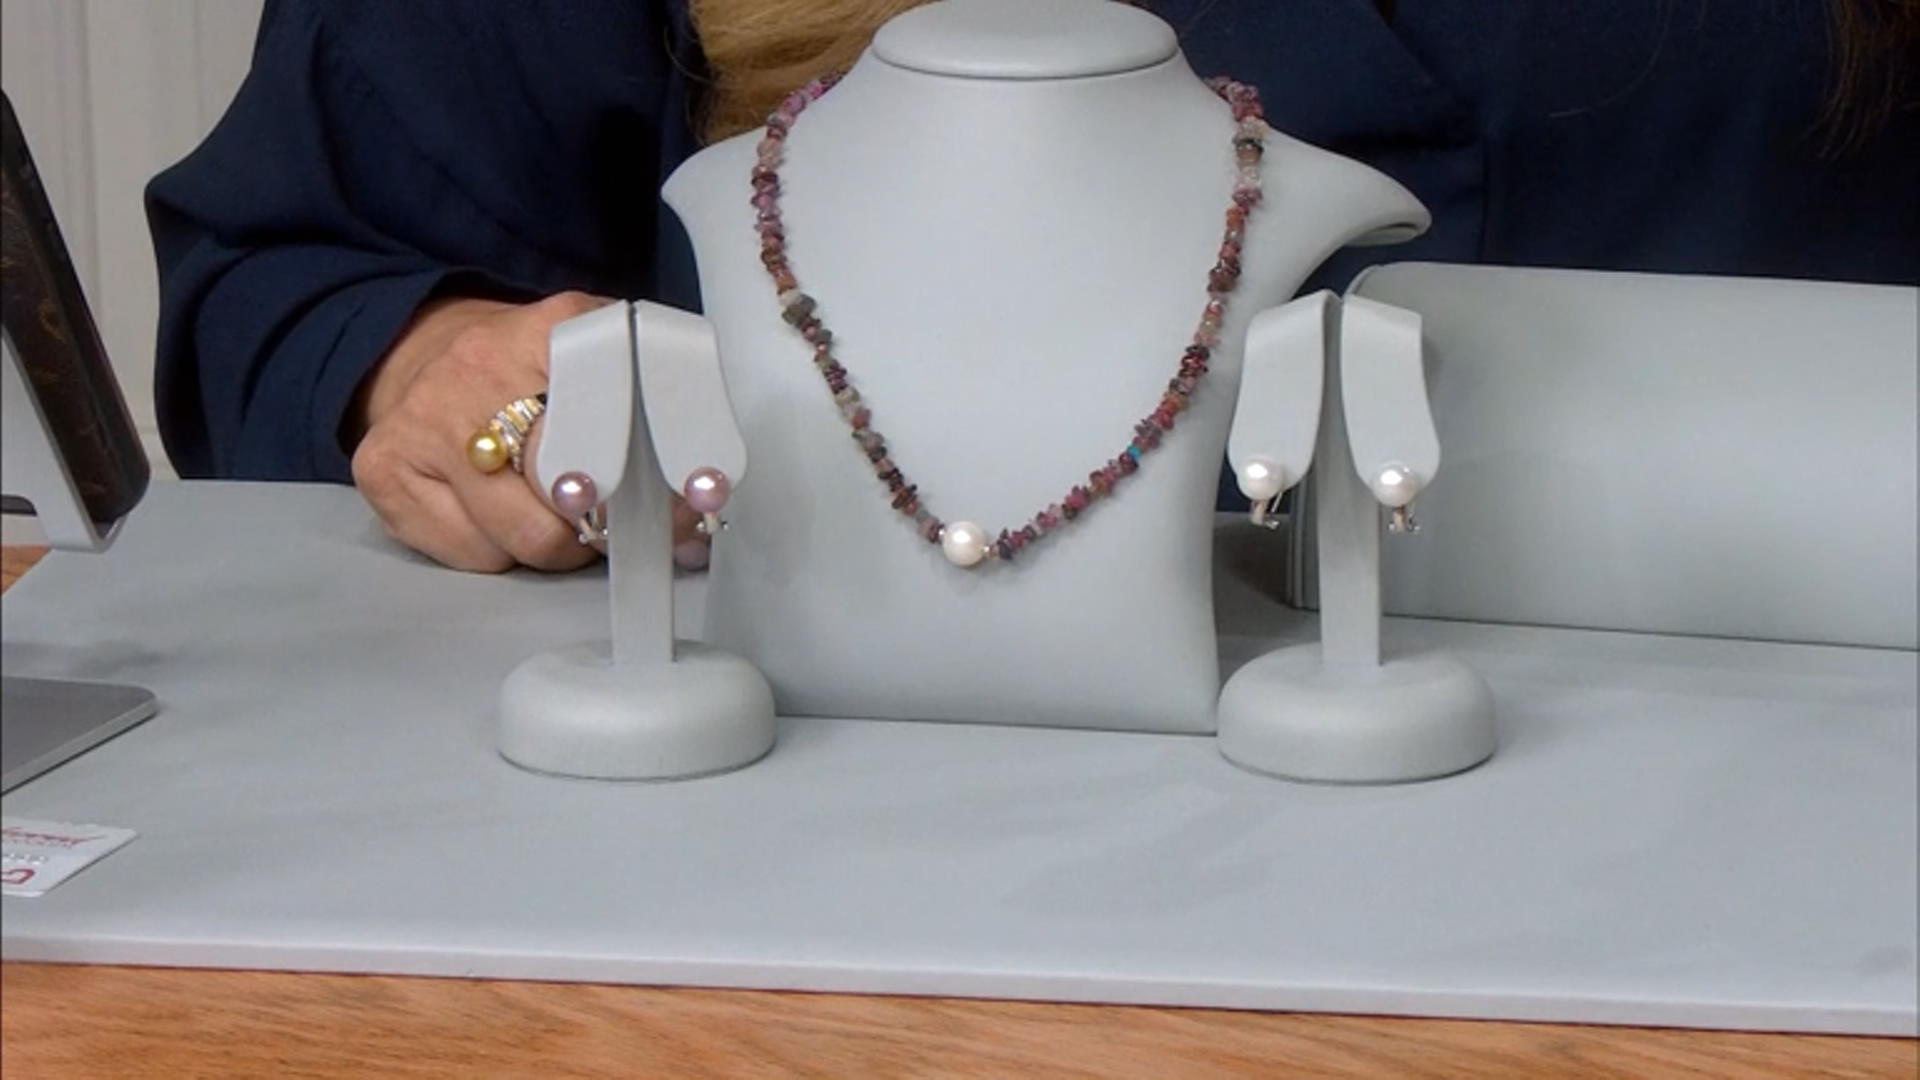 White Cultured Freshwater Pearl with Multi Color Spinel and Sapphire Rhodium Over Silver Necklace Video Thumbnail